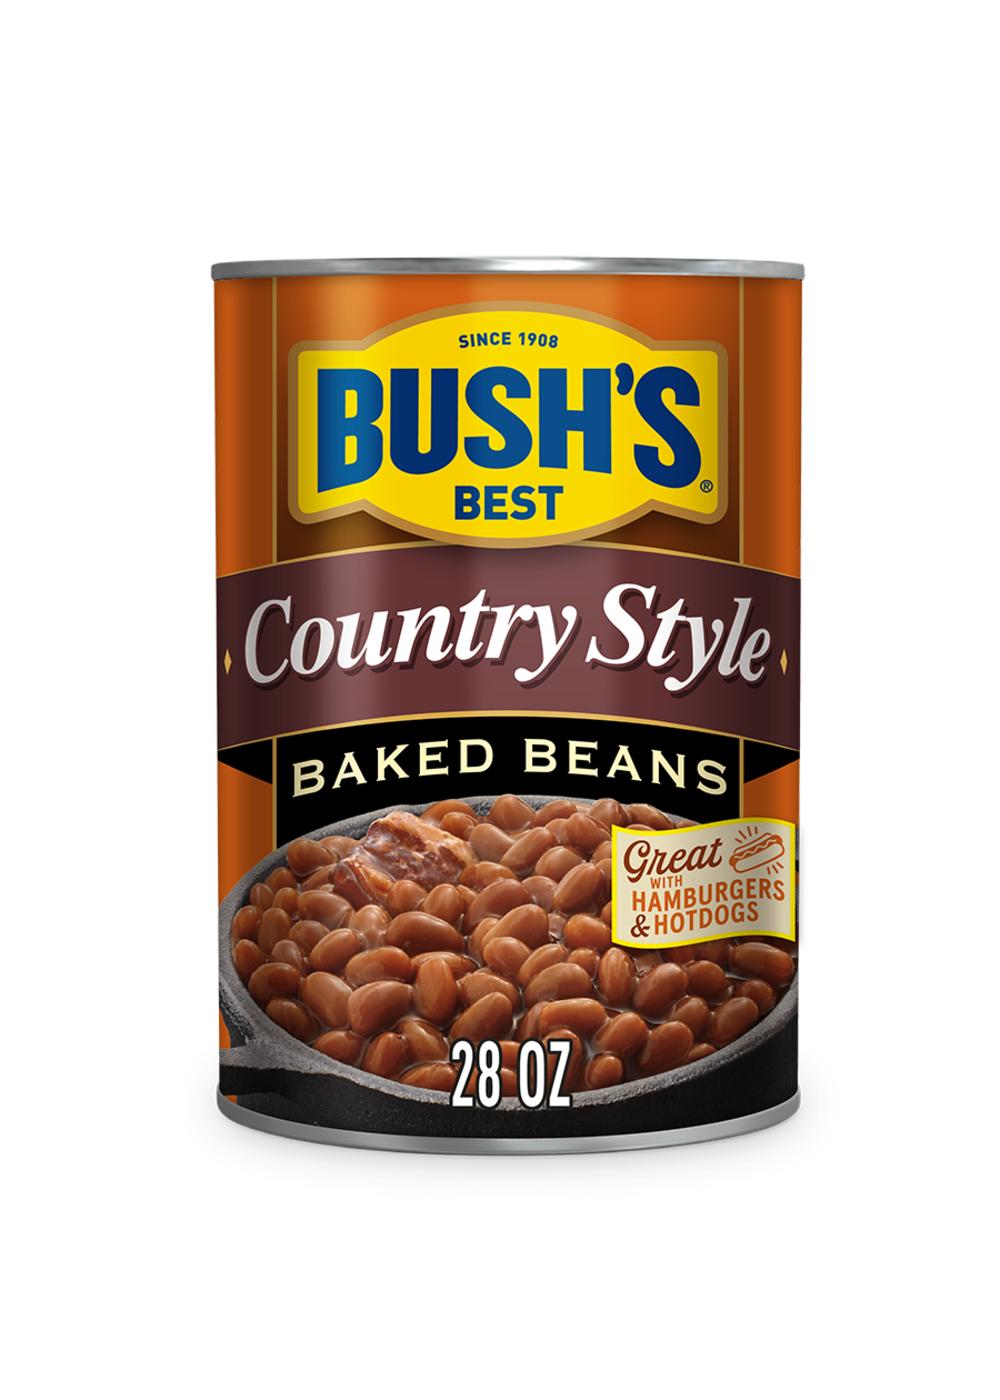 Bush's Best Country Style Baked Beans; image 1 of 3